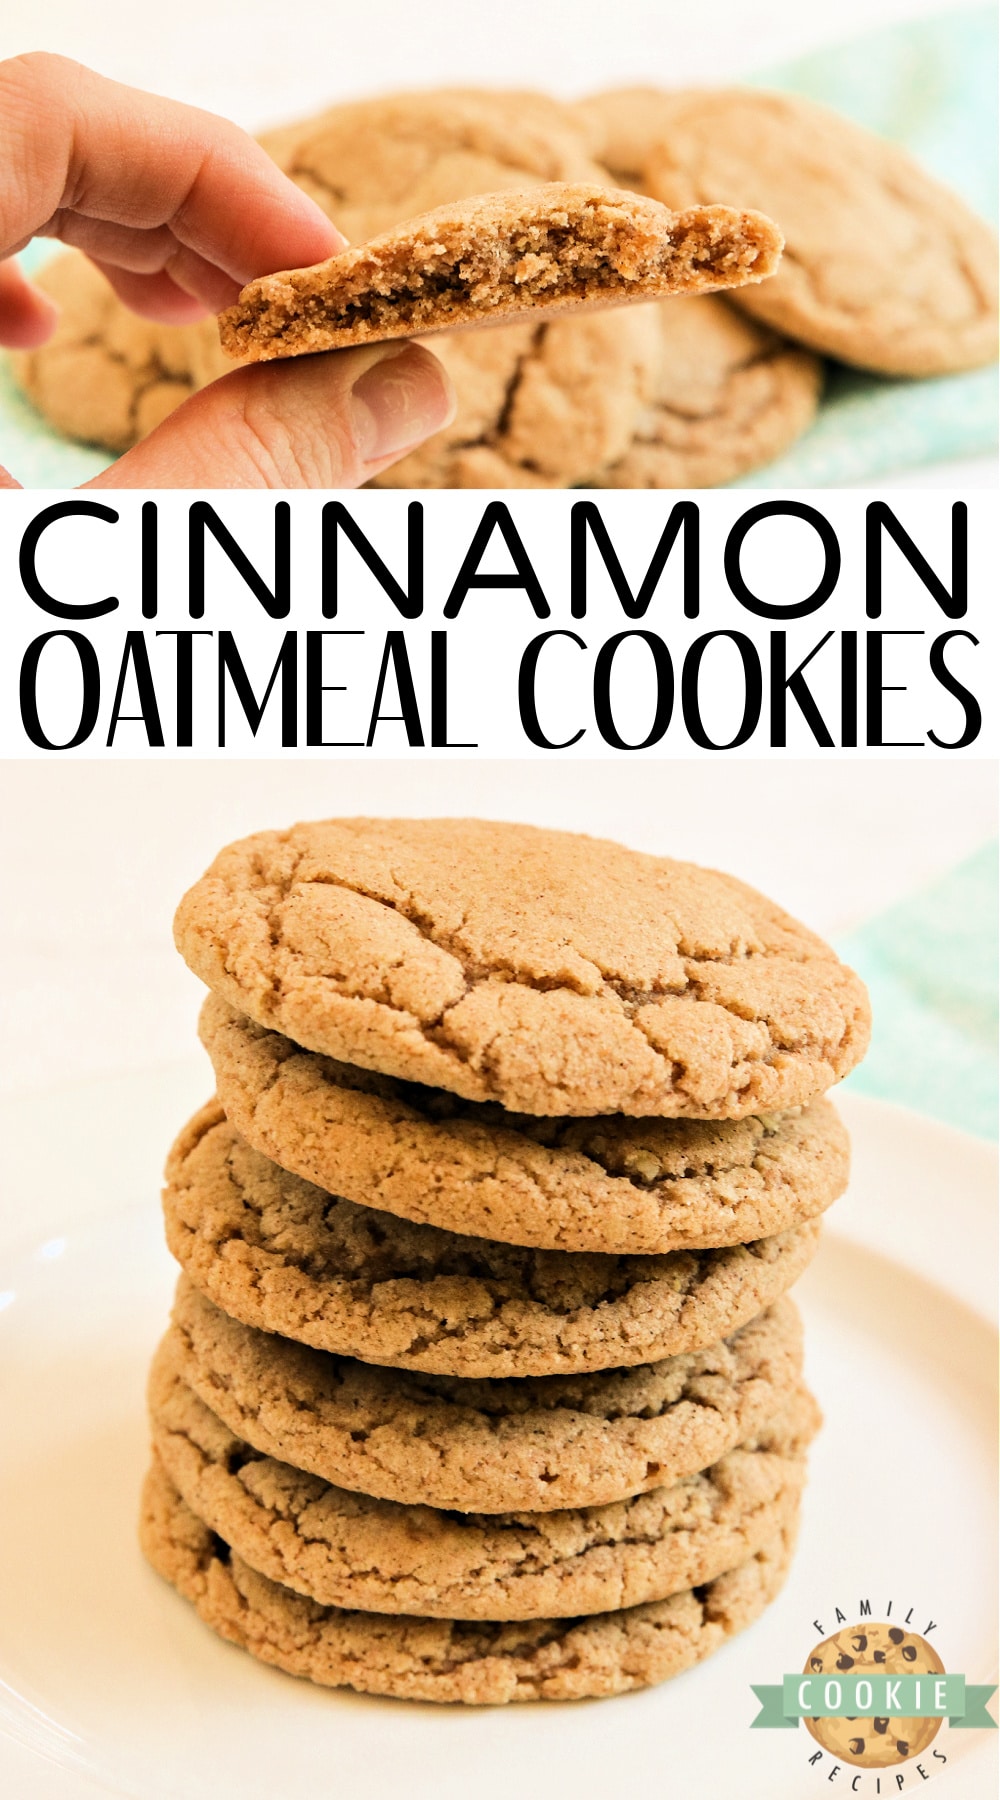 Cinnamon Oatmeal Cookies are soft, chewy and packed with oat flour and ground cinnamon. My new favorite oatmeal cookie recipe!